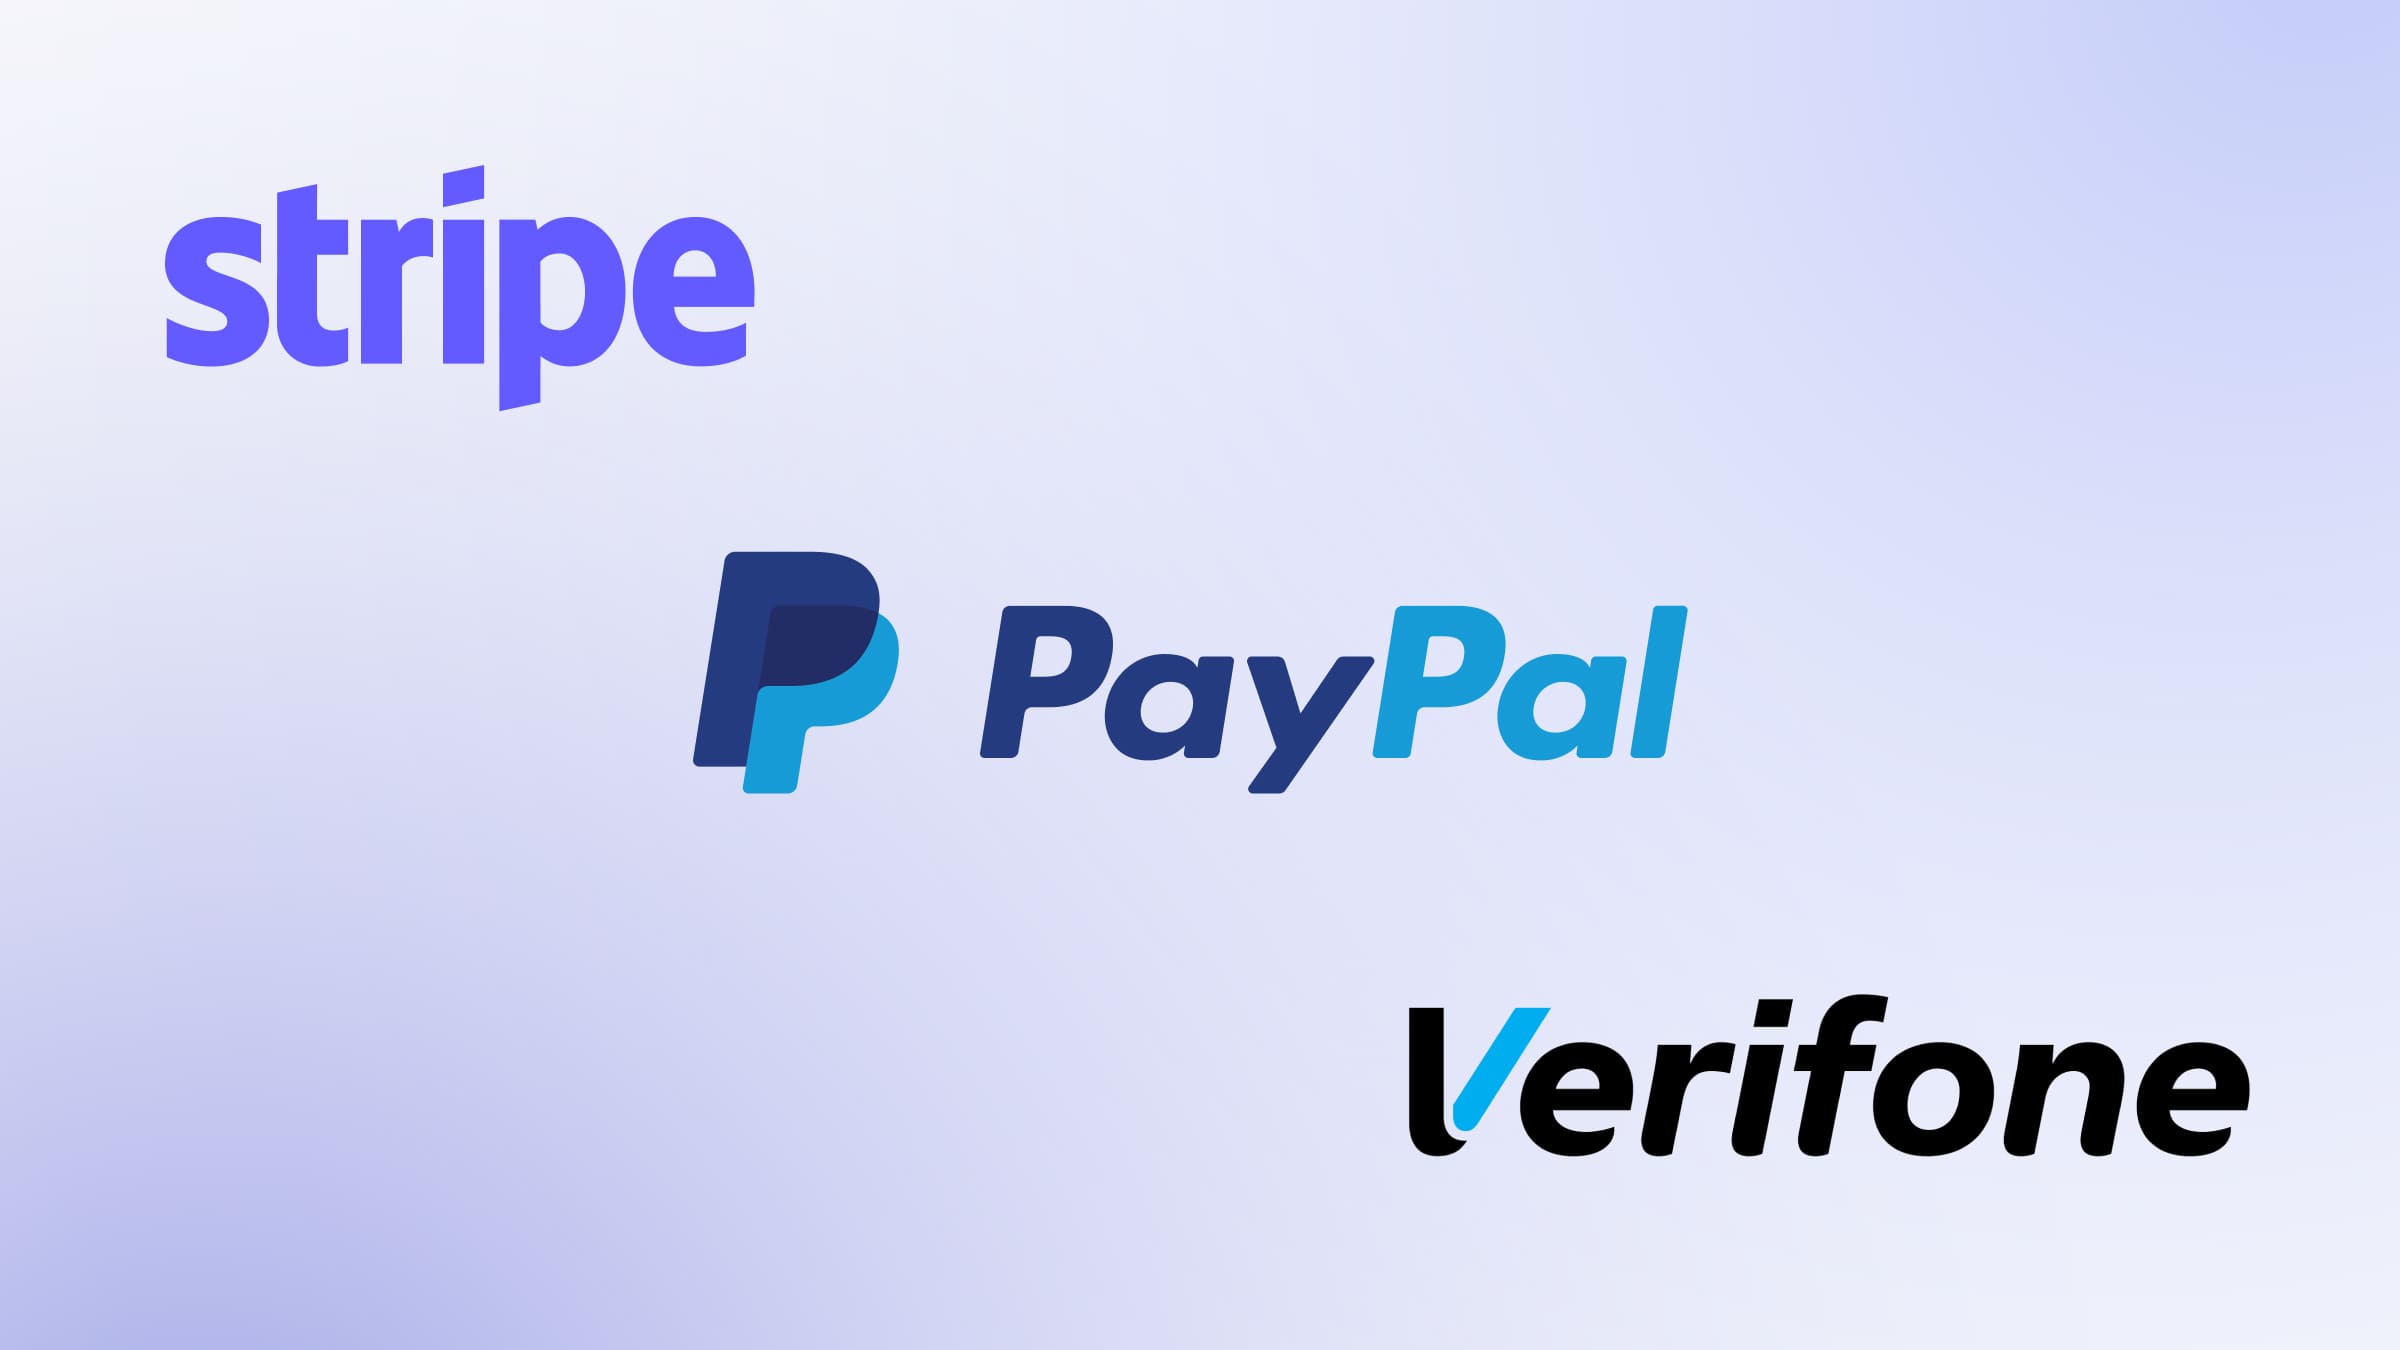 On Tilda you can connect the following payment systems: Stripe, PayPal, Verifone.